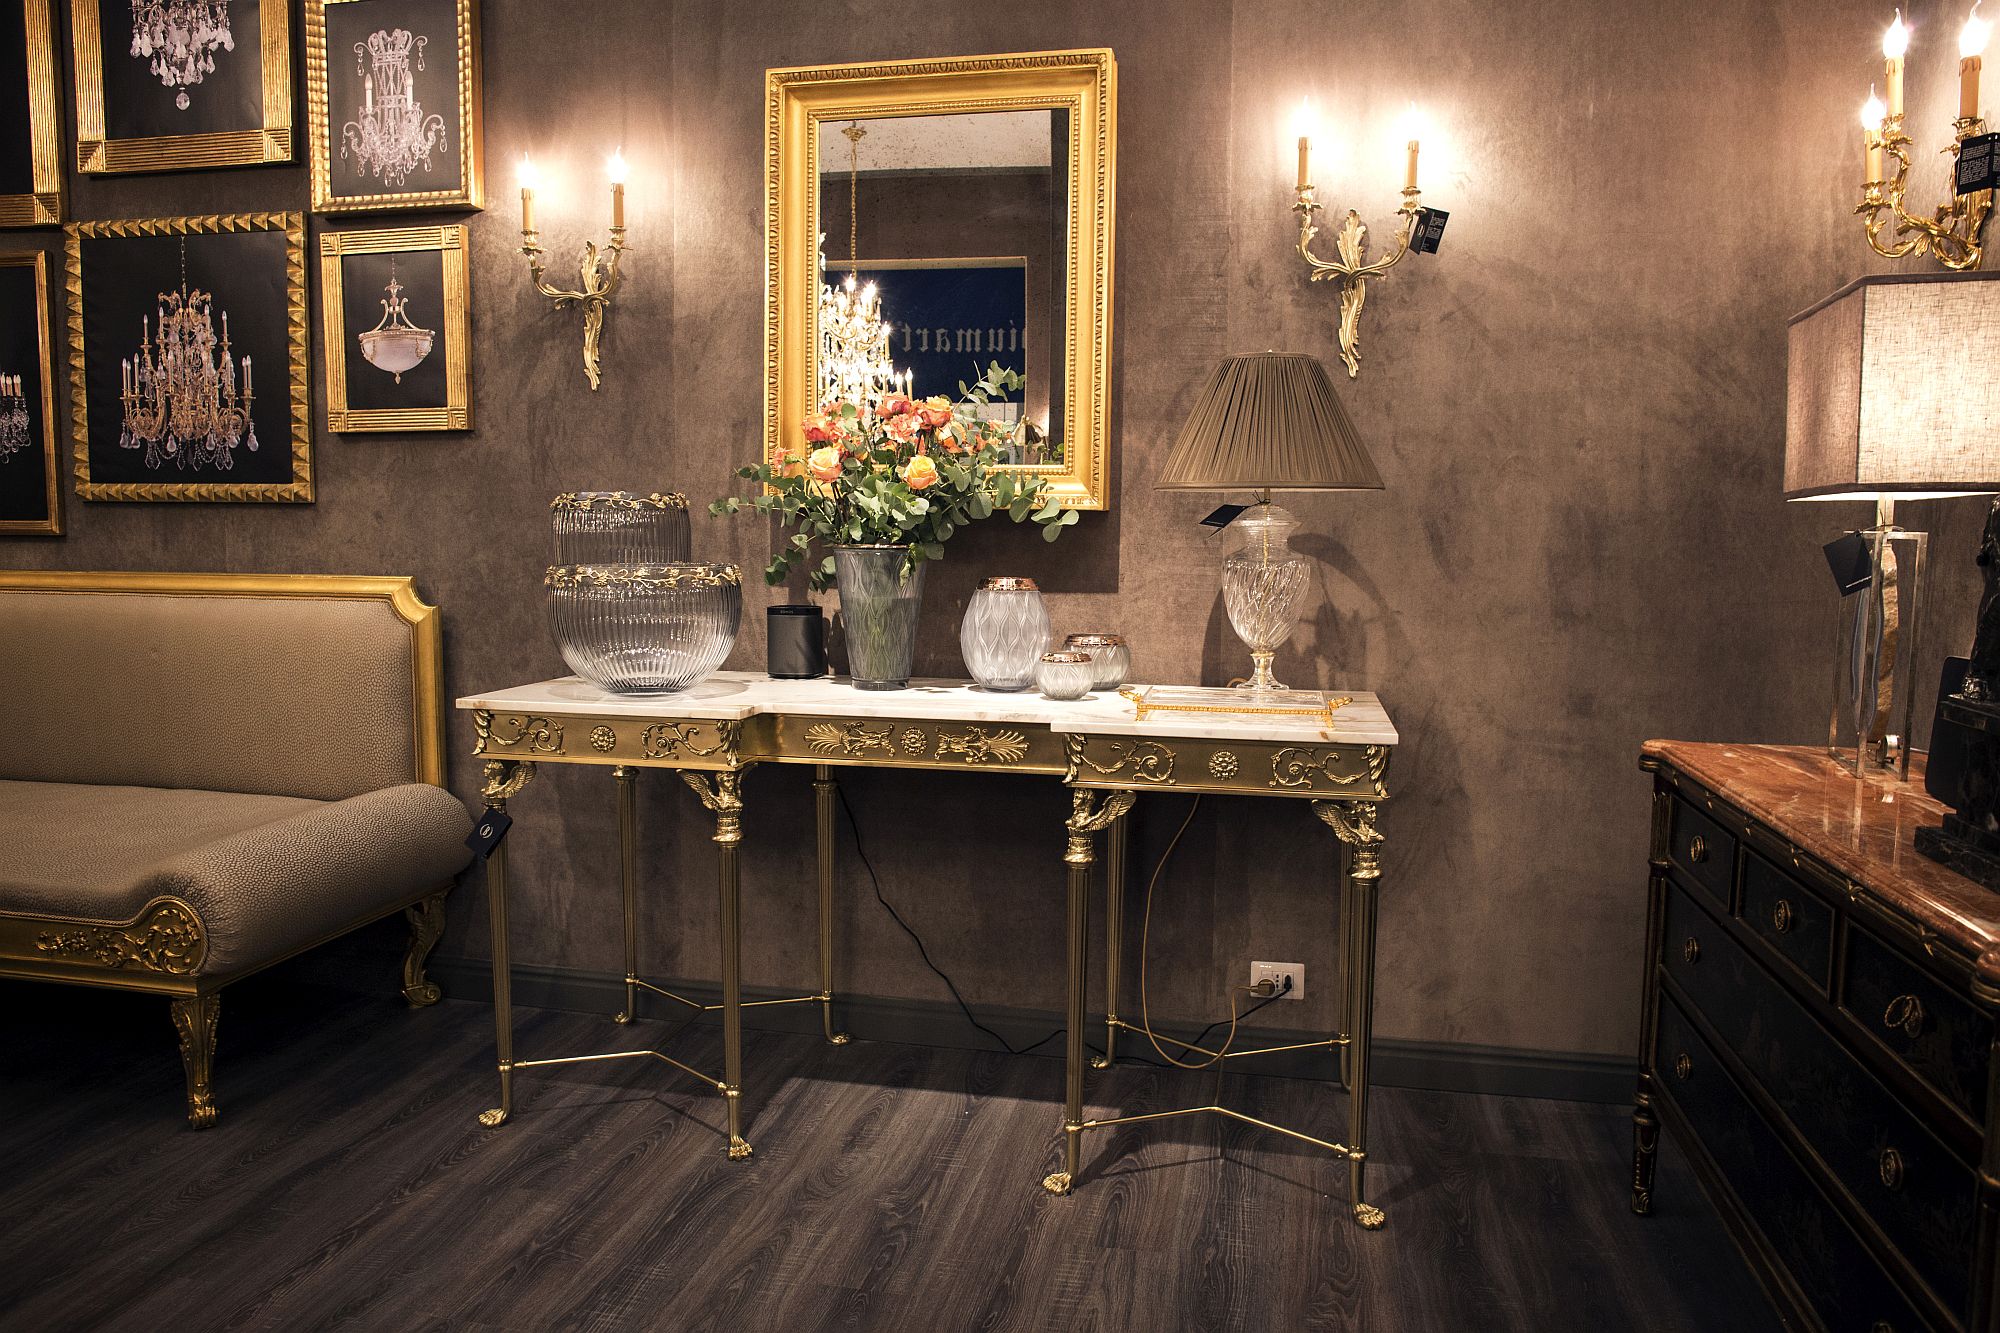 Gold mirror frame brings sparkle and style to the retro style interior